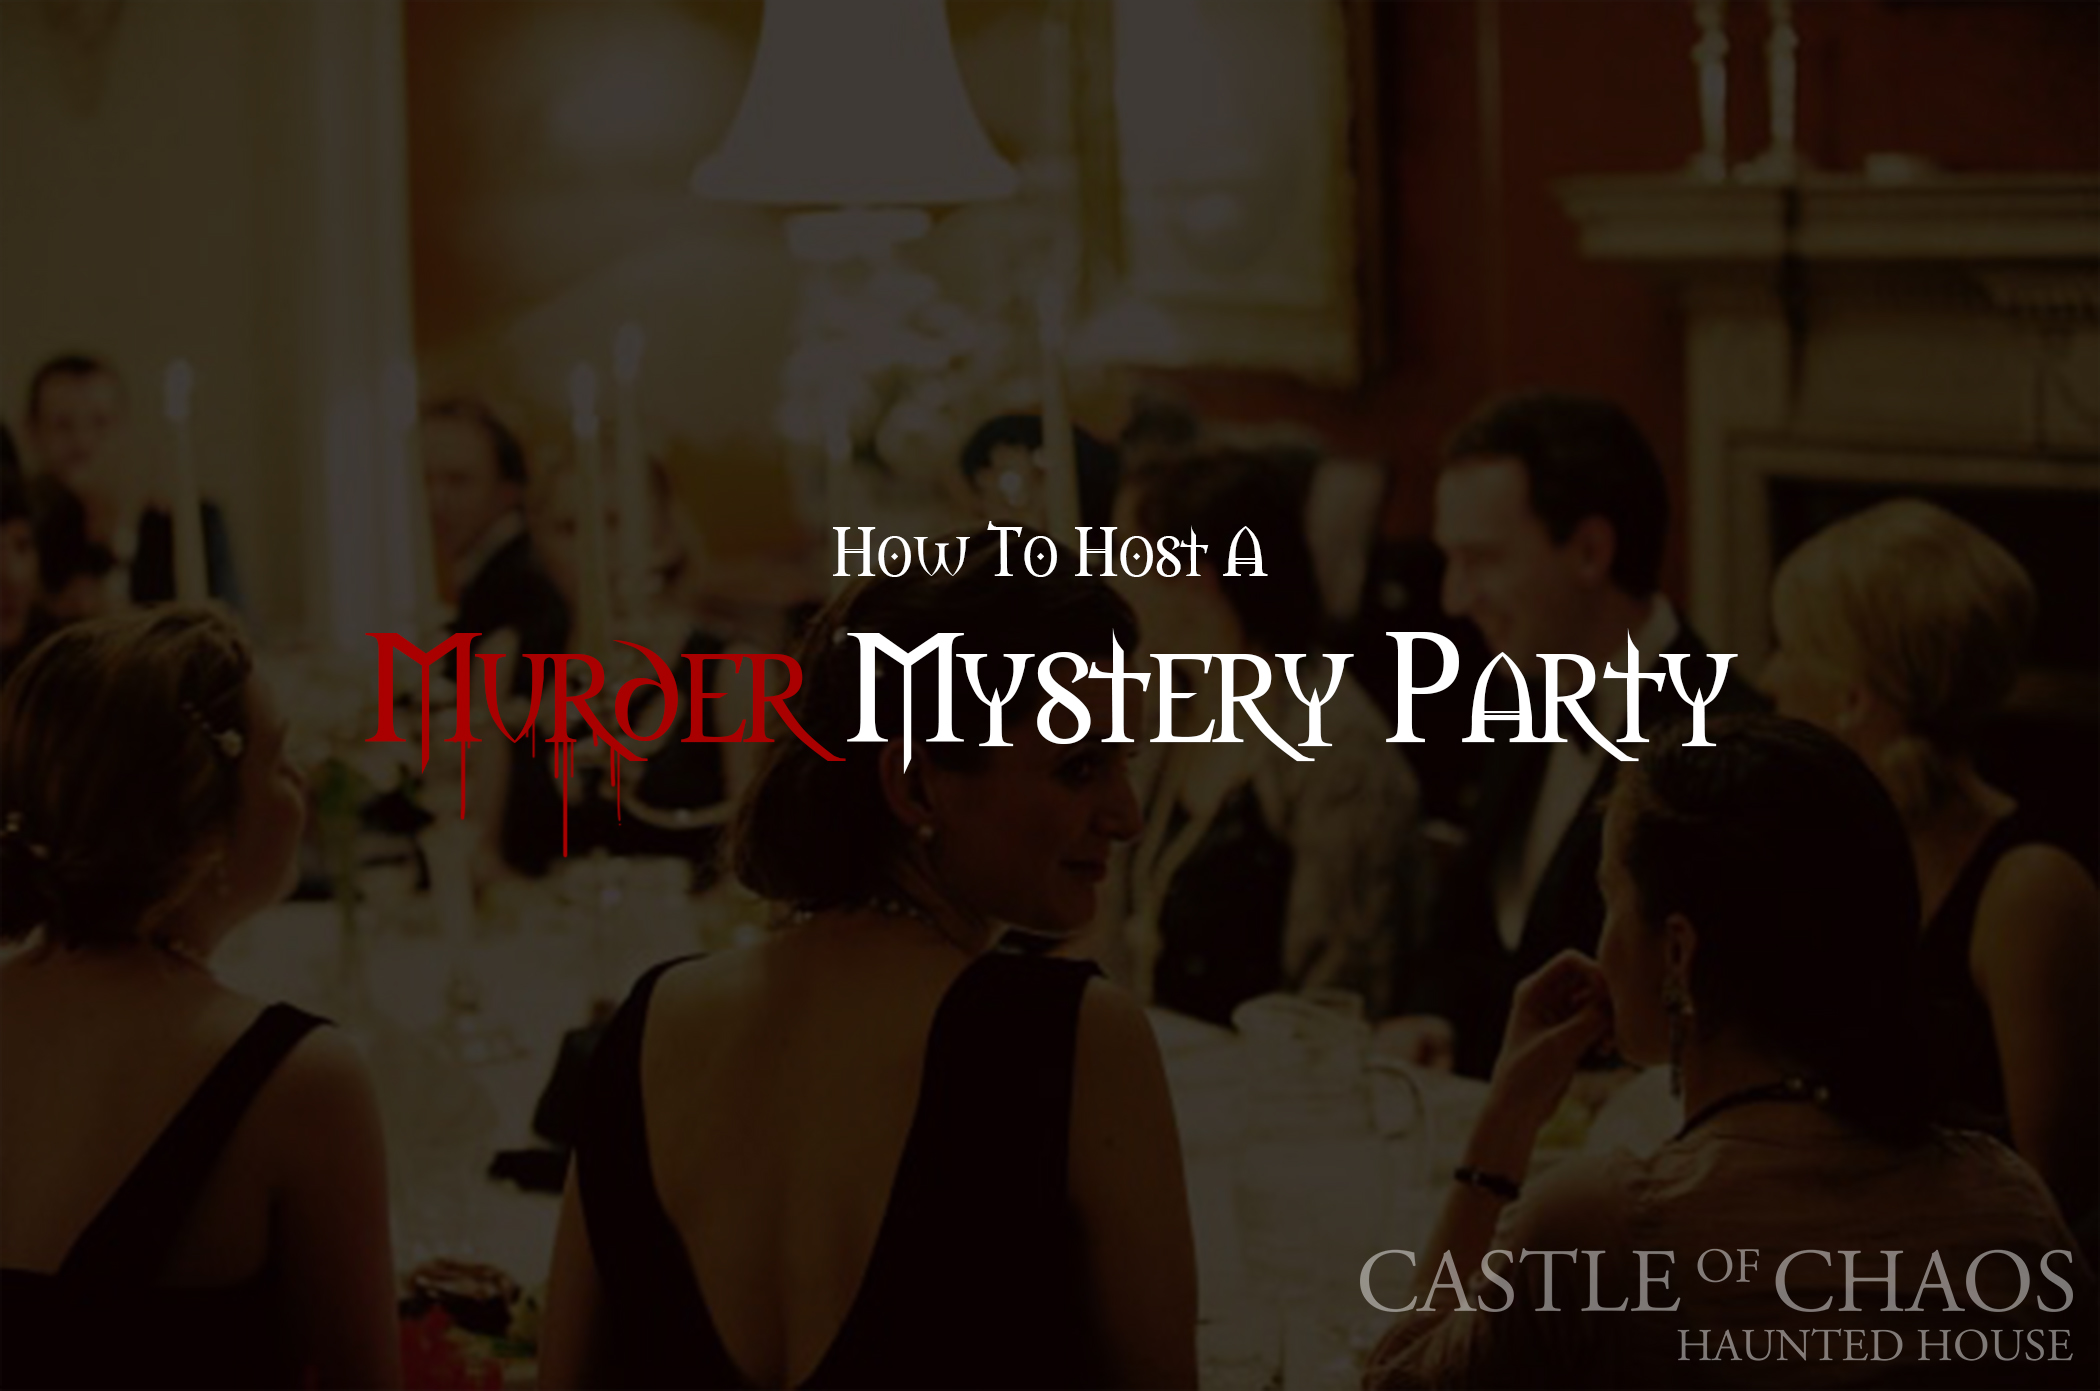 How to Host A Murder Mystery Dinner Party